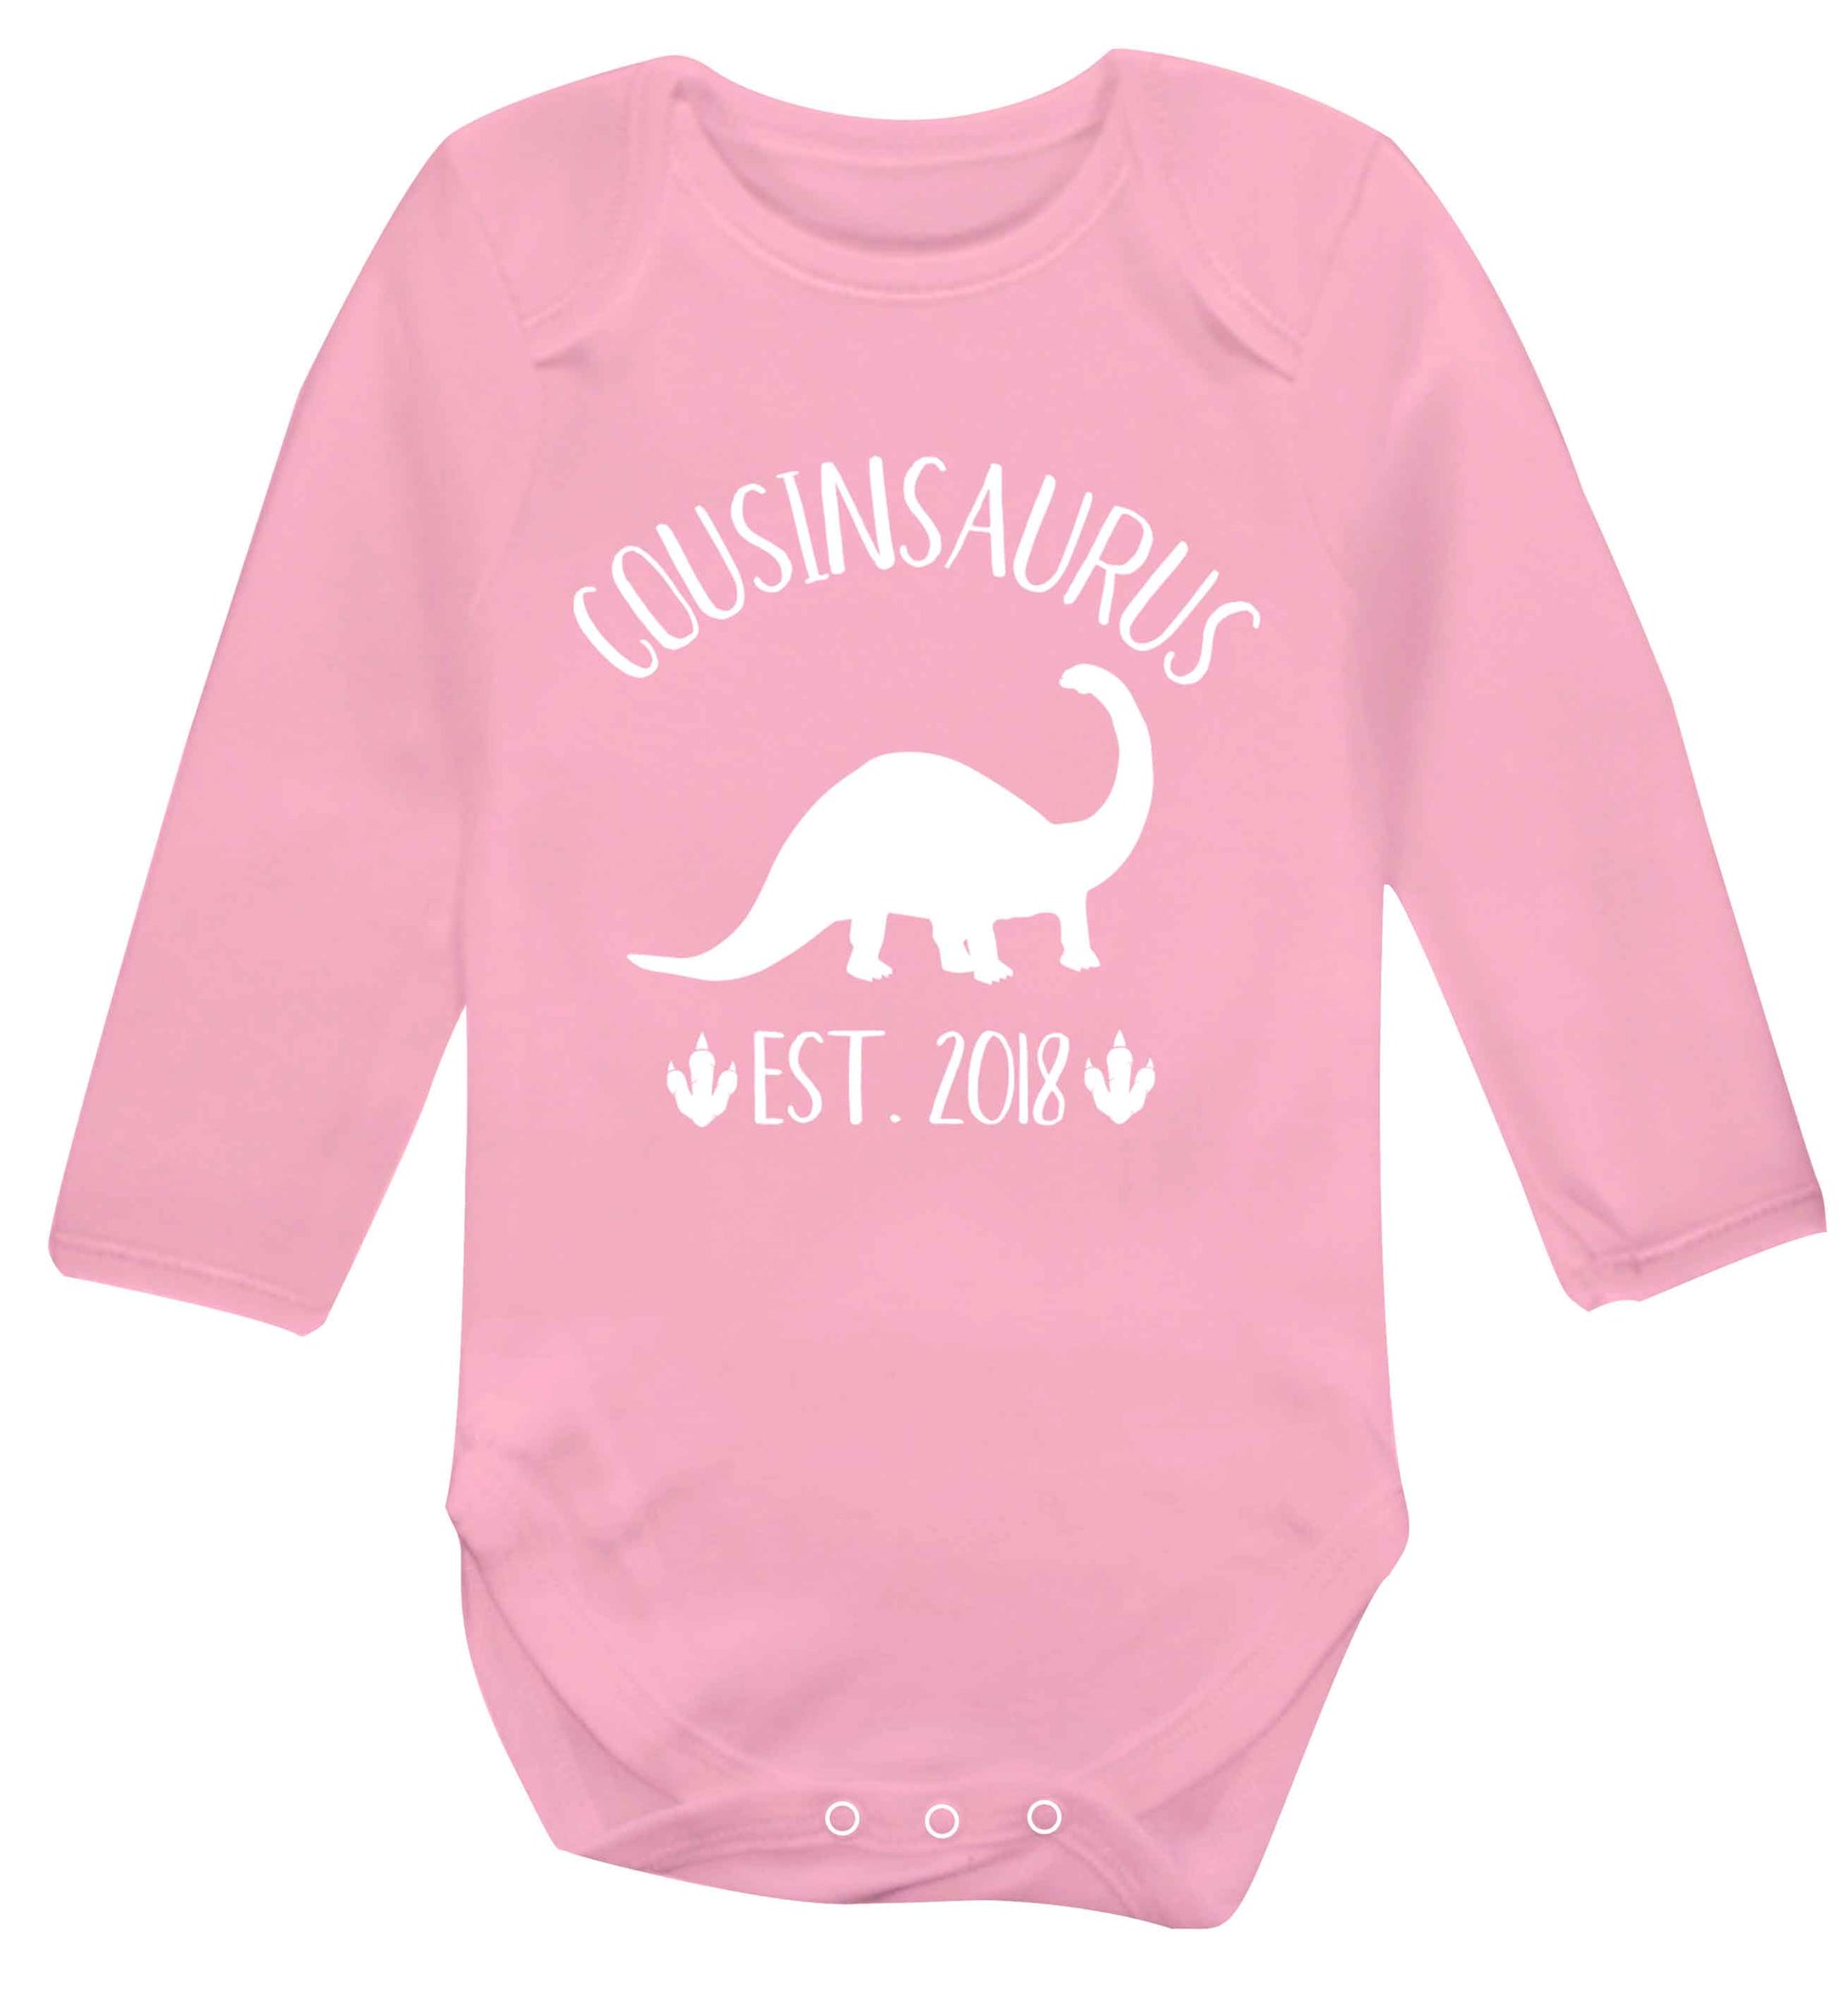 Personalised cousinsaurus since (custom date) Baby Vest long sleeved pale pink 6-12 months